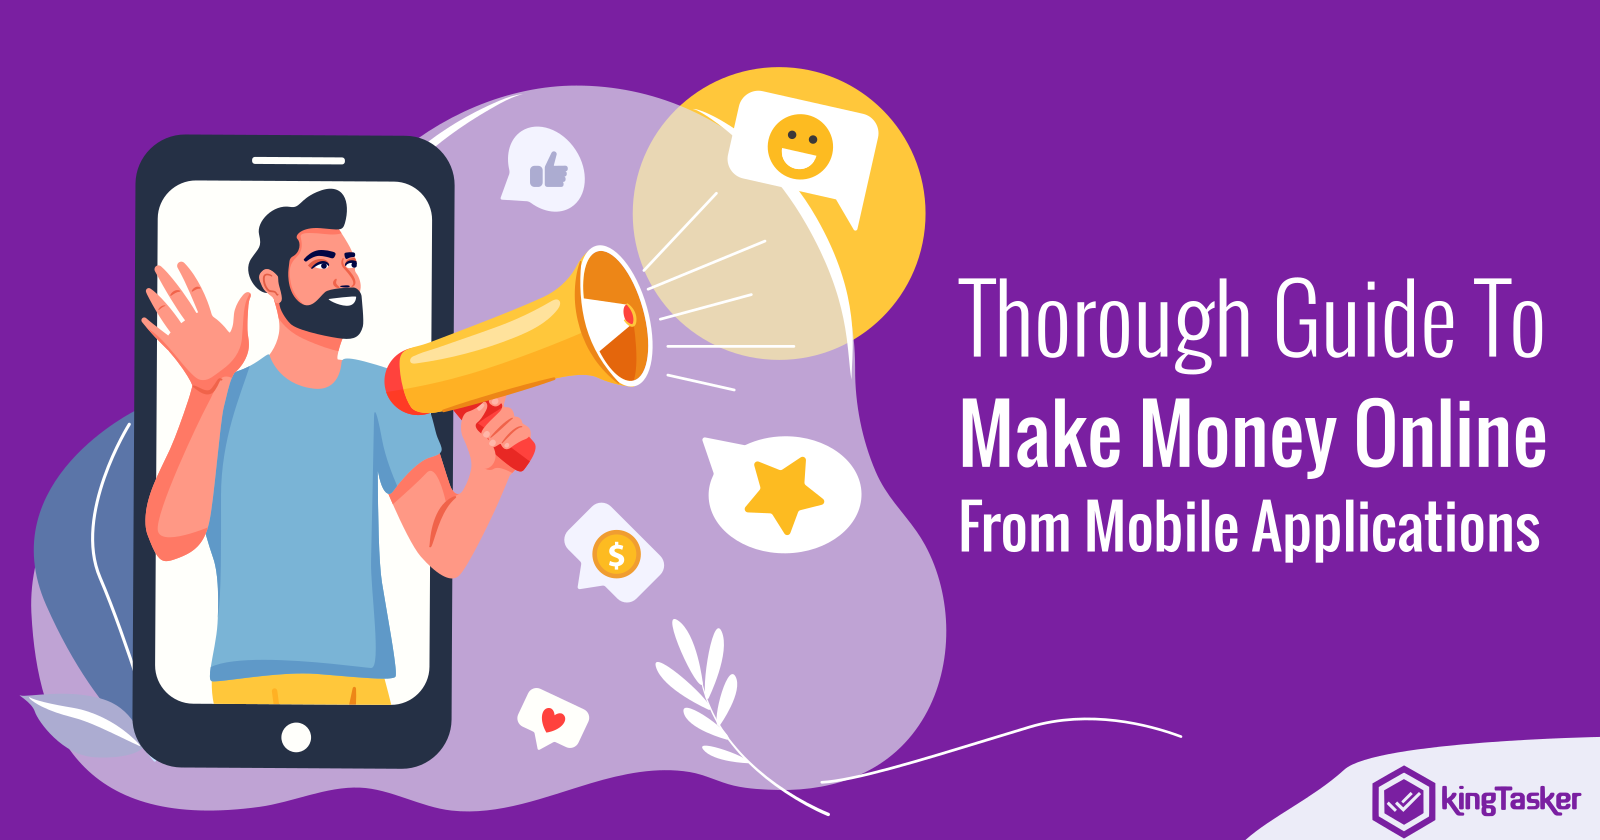 Thorough Guide To Make Money Online From Mobile Applications